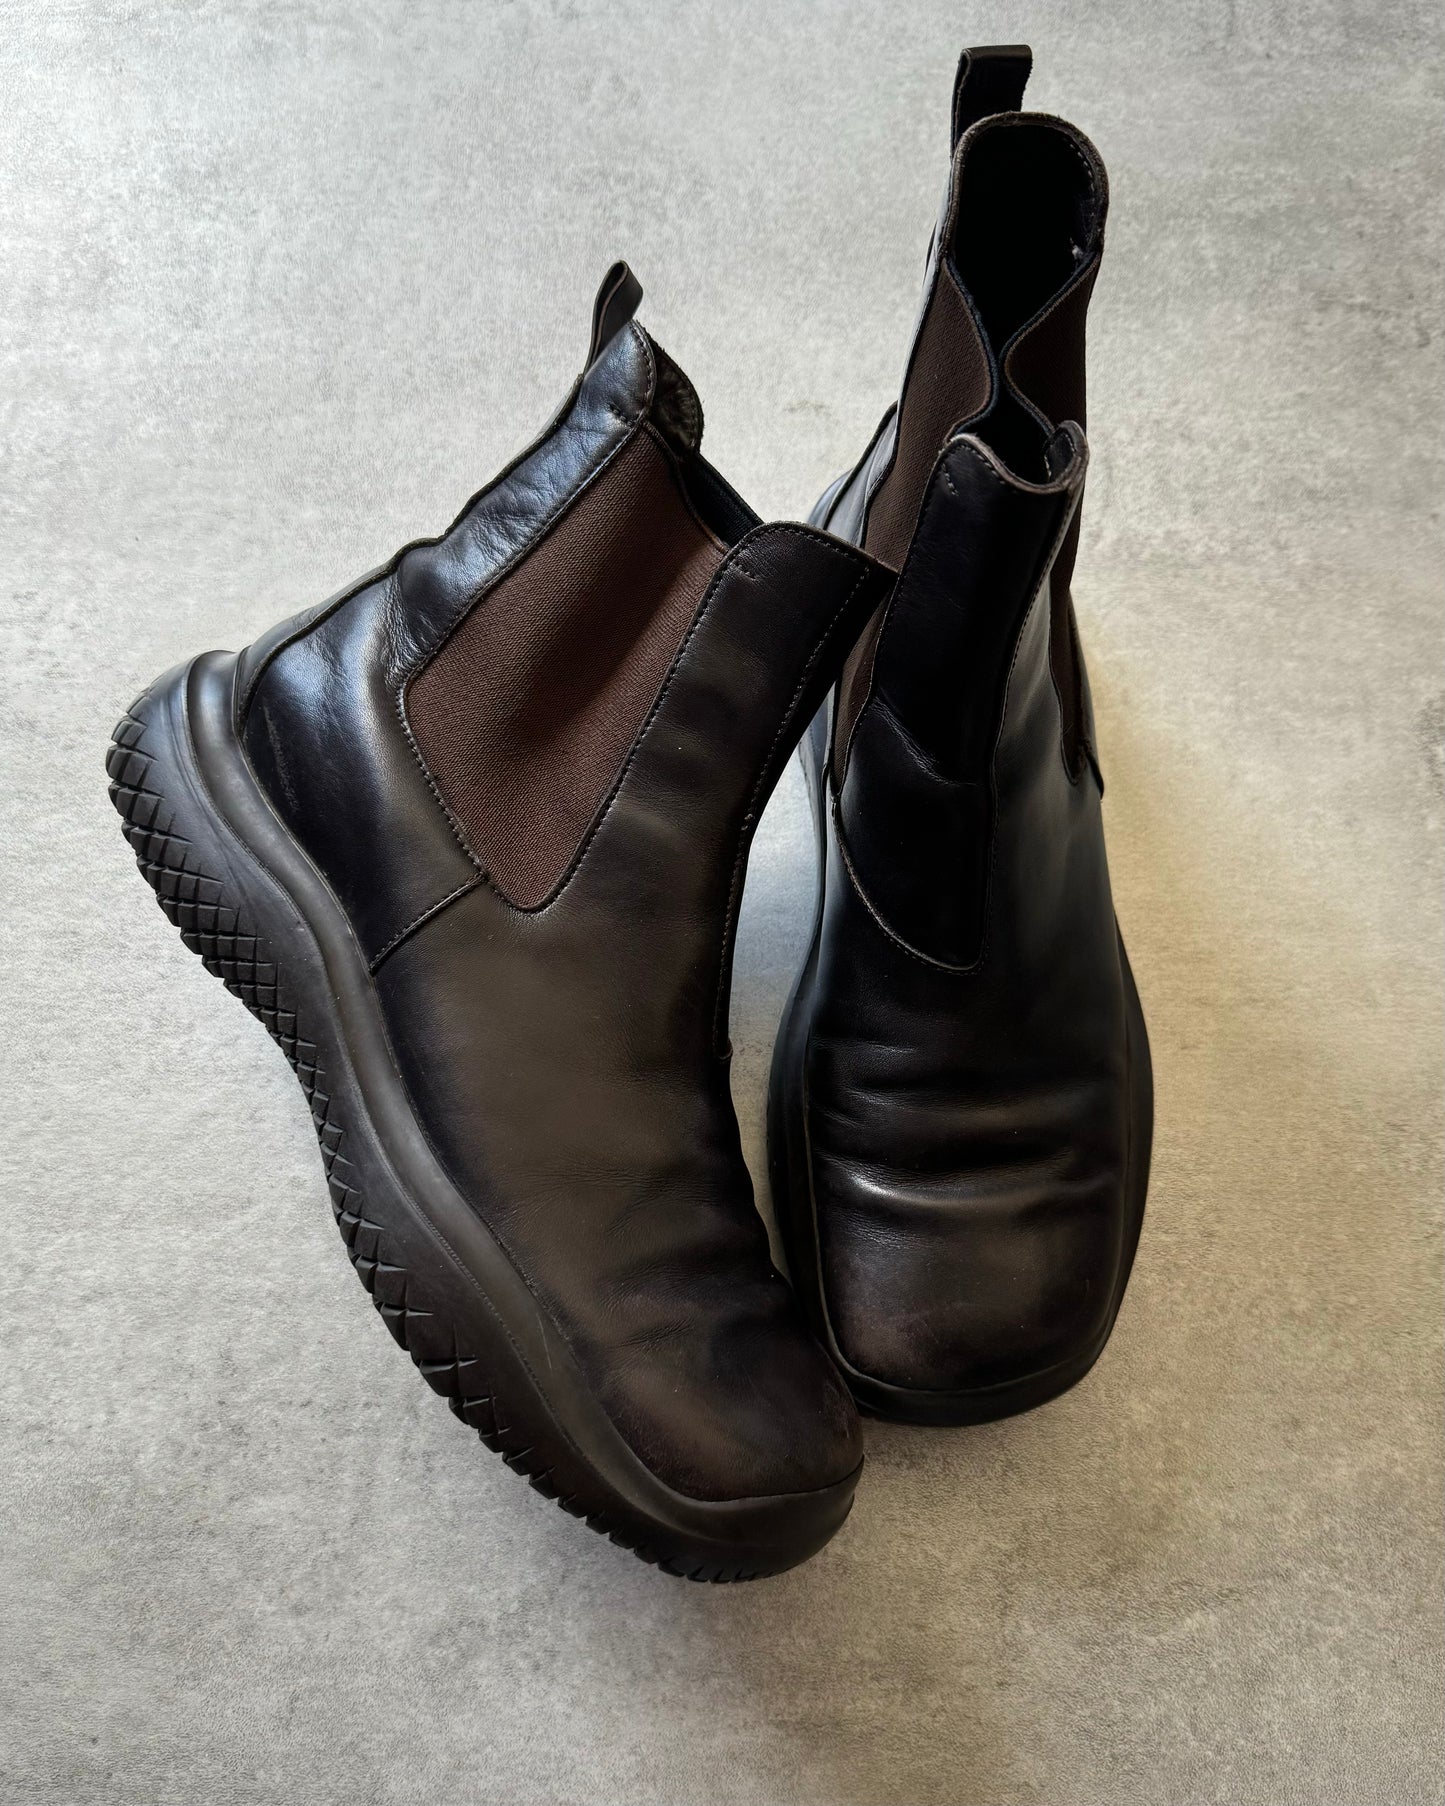 FW1999 Prada Brown Leather Boots (41) - 2